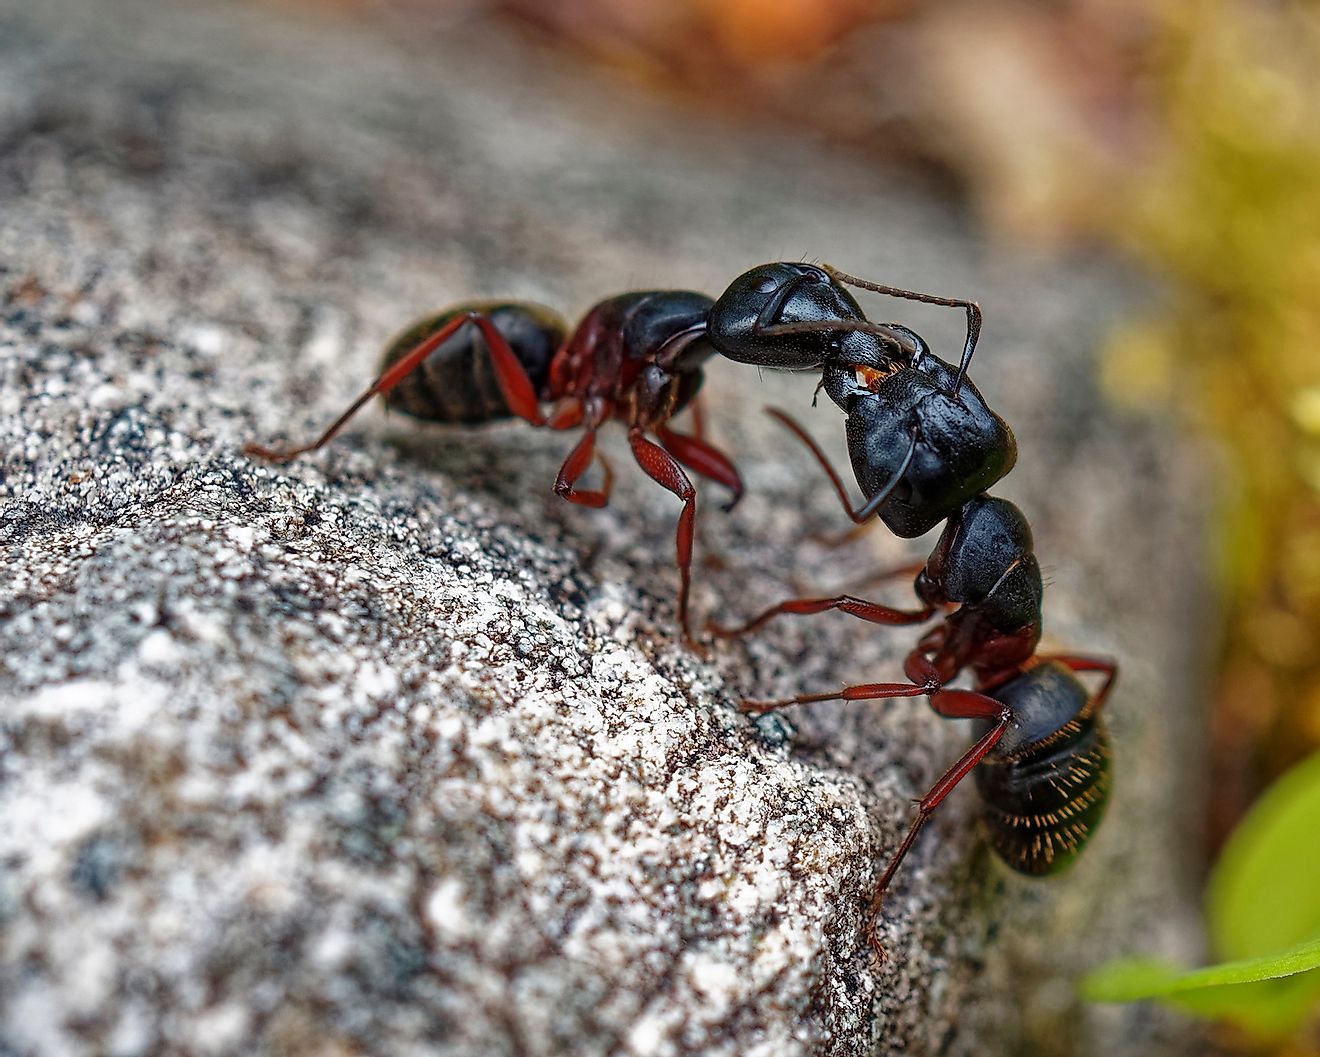 Carpenter Ants moving around and communicating. Image credit: ggw/Shutterstock.com